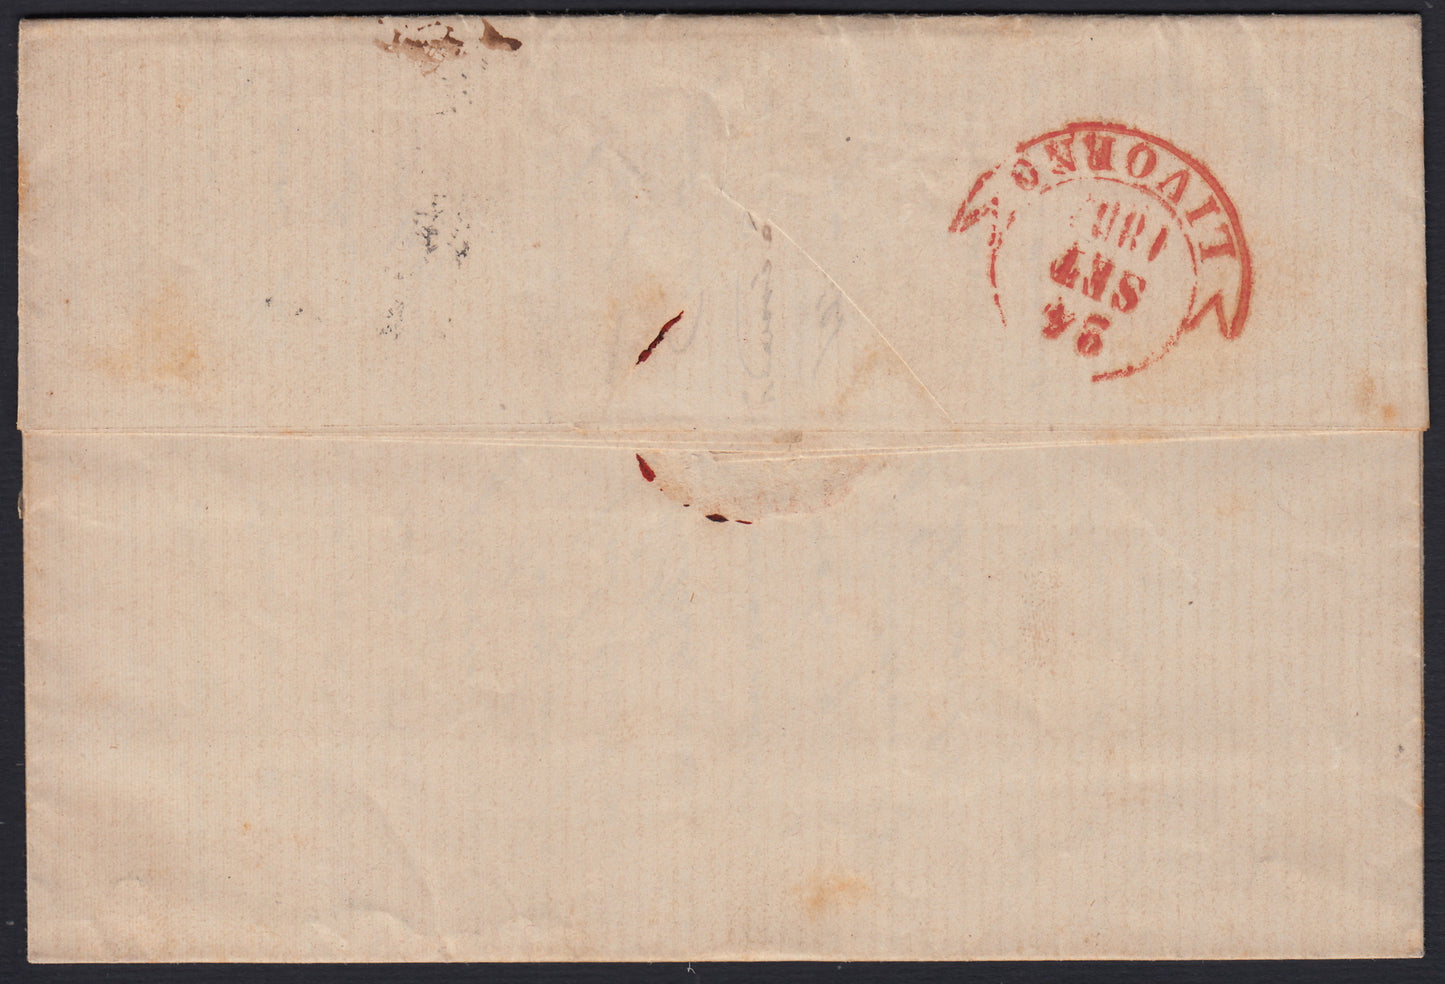 259 - 1857 - IV issue, Letter sent from Genoa to Livorno 22/9/57 franked with c. 40 scarlet red edition 1857 (16A, Rattone n. 33a)